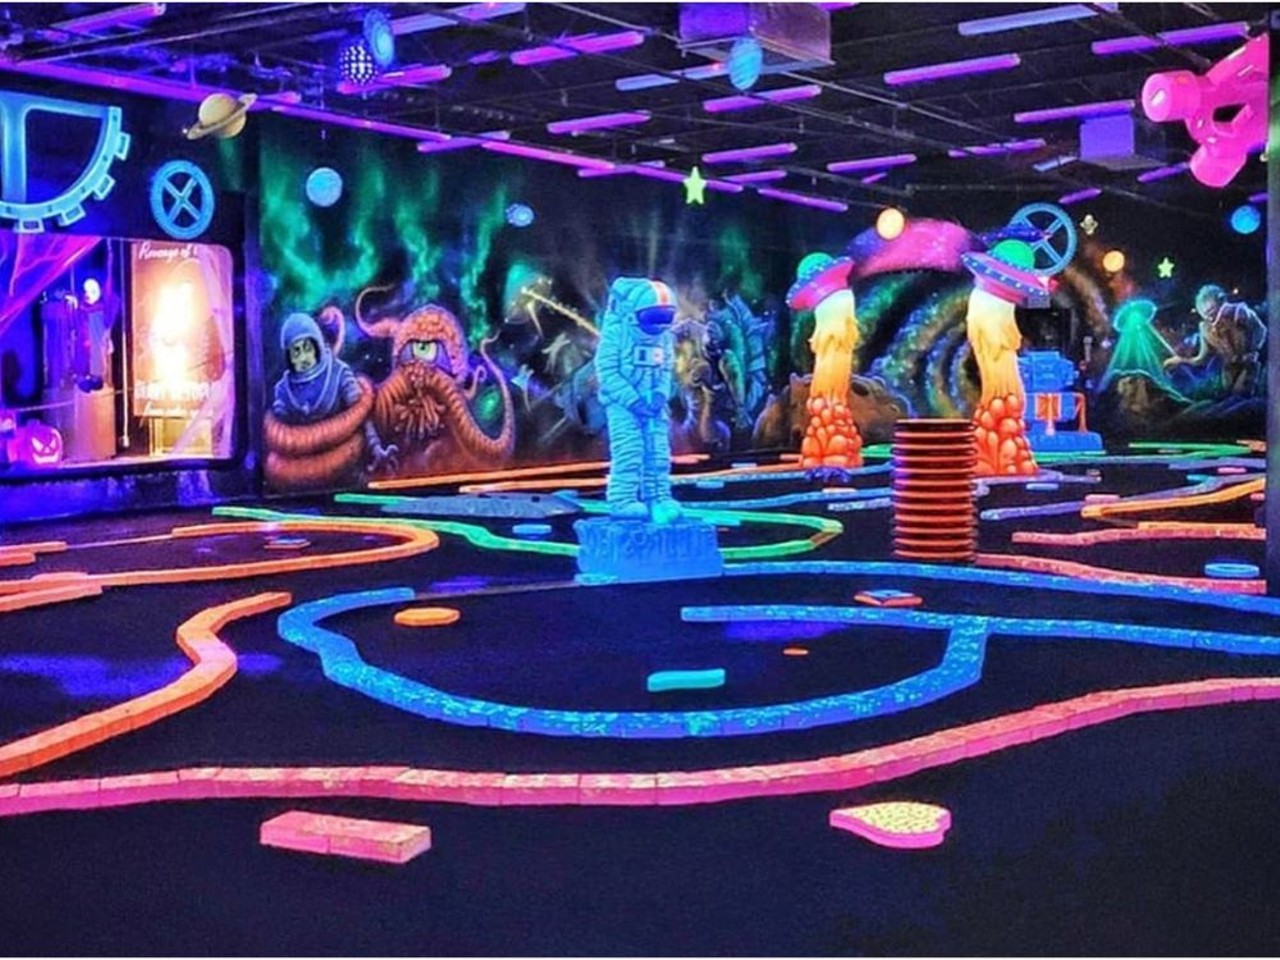 Putt some balls at Cosmic Mayhem Mini Golf
903 E. Bitters Road Ste. 310, (210) 437-1072, cosmicmayhem.com
Cosmic Mayhem offers mini golf with a fun twist — the 18-hole course is indoors and sports a funky black light aesthetic. The Bitters Road spot is open until 11:30 p.m. on weekends, leaving room for plenty of evening enjoyment.